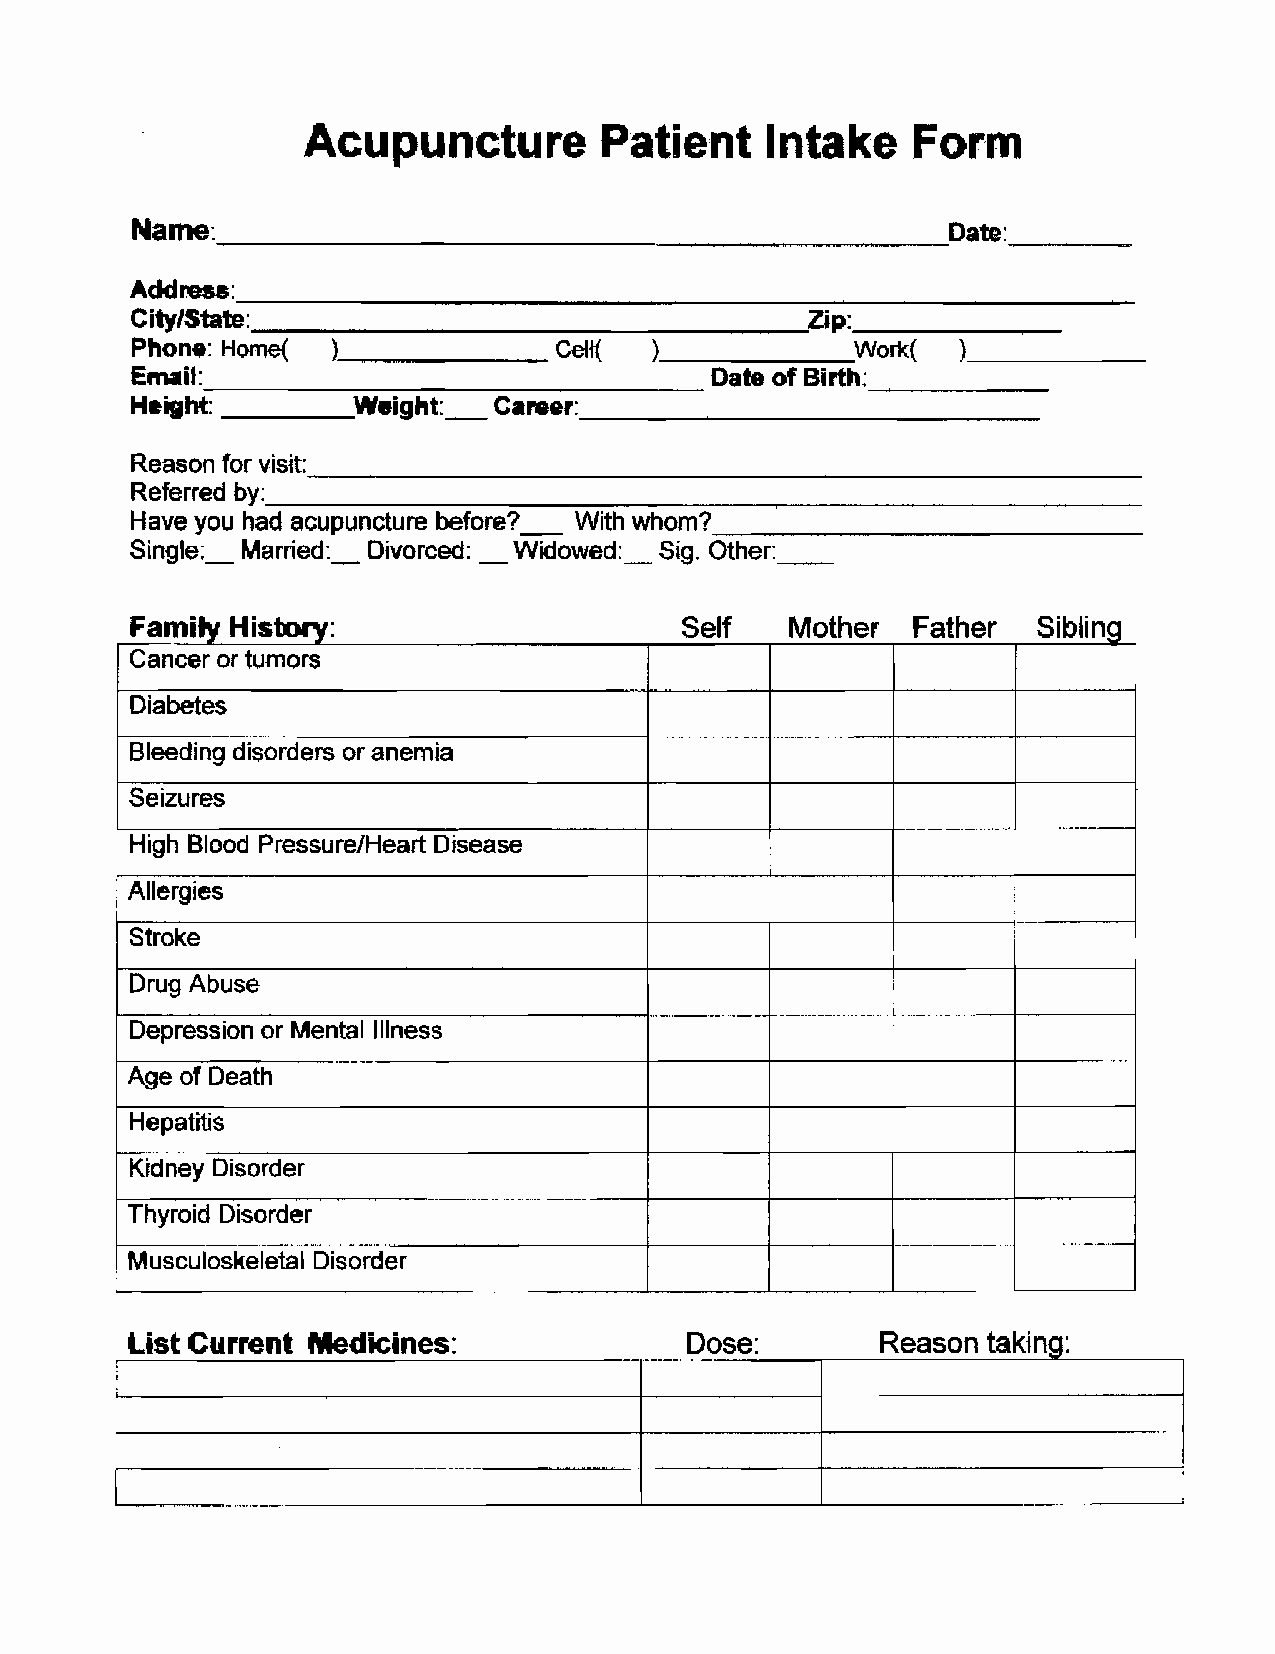 Patient Intake form Template Inspirational Acupuncture forms Templates Reverse Search